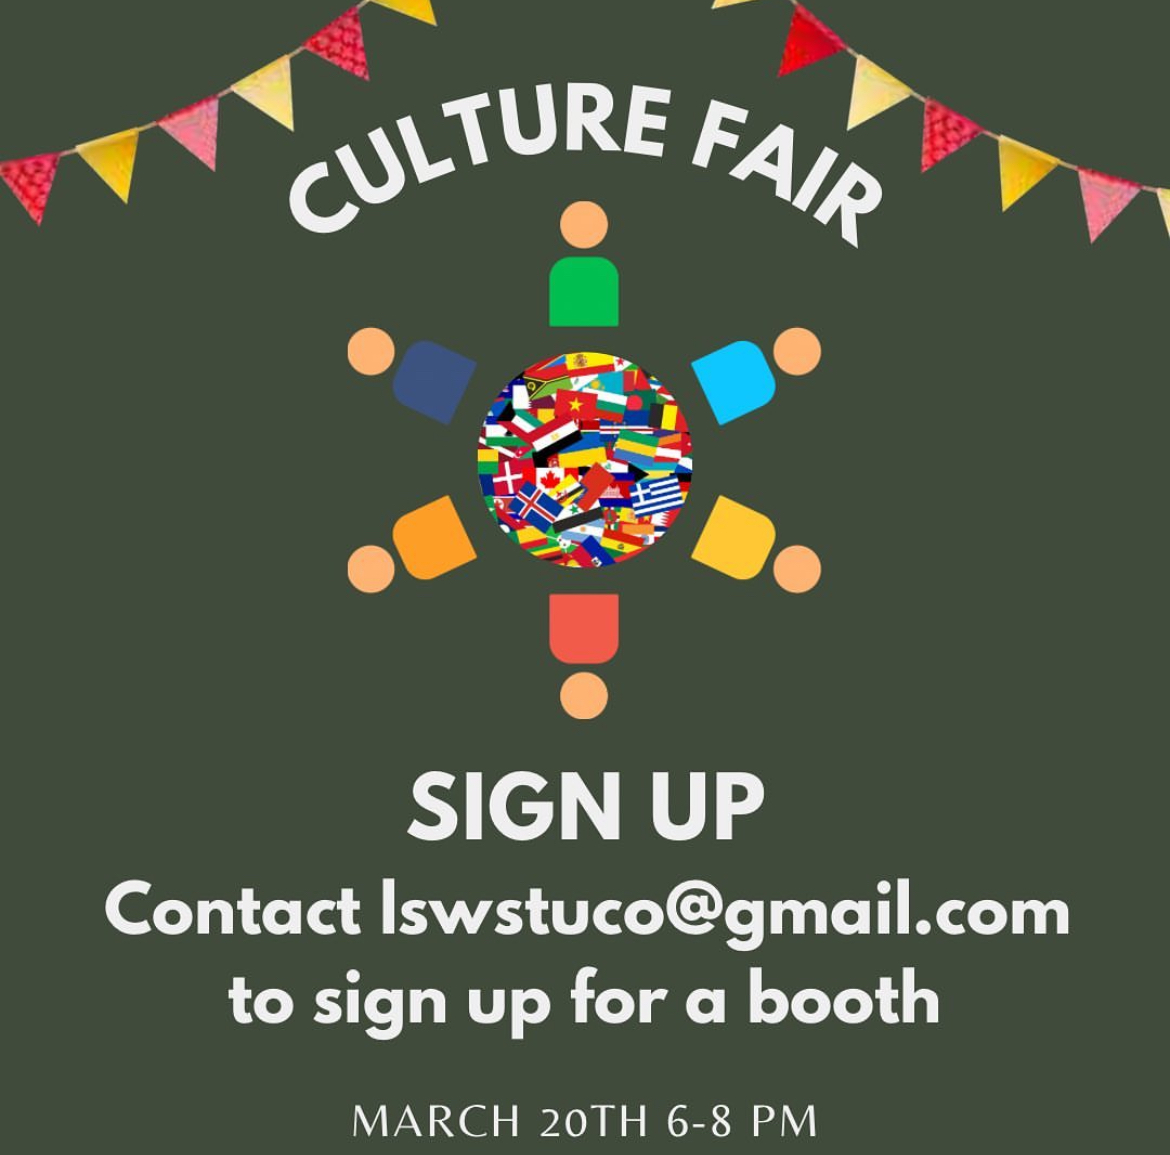 Student+Council+is+hosting+their+first+ever+Culture+Fair+Wednesday%2C+March+20th+from+6+p.m.+-+8+p.m.+Admissions+are+free.